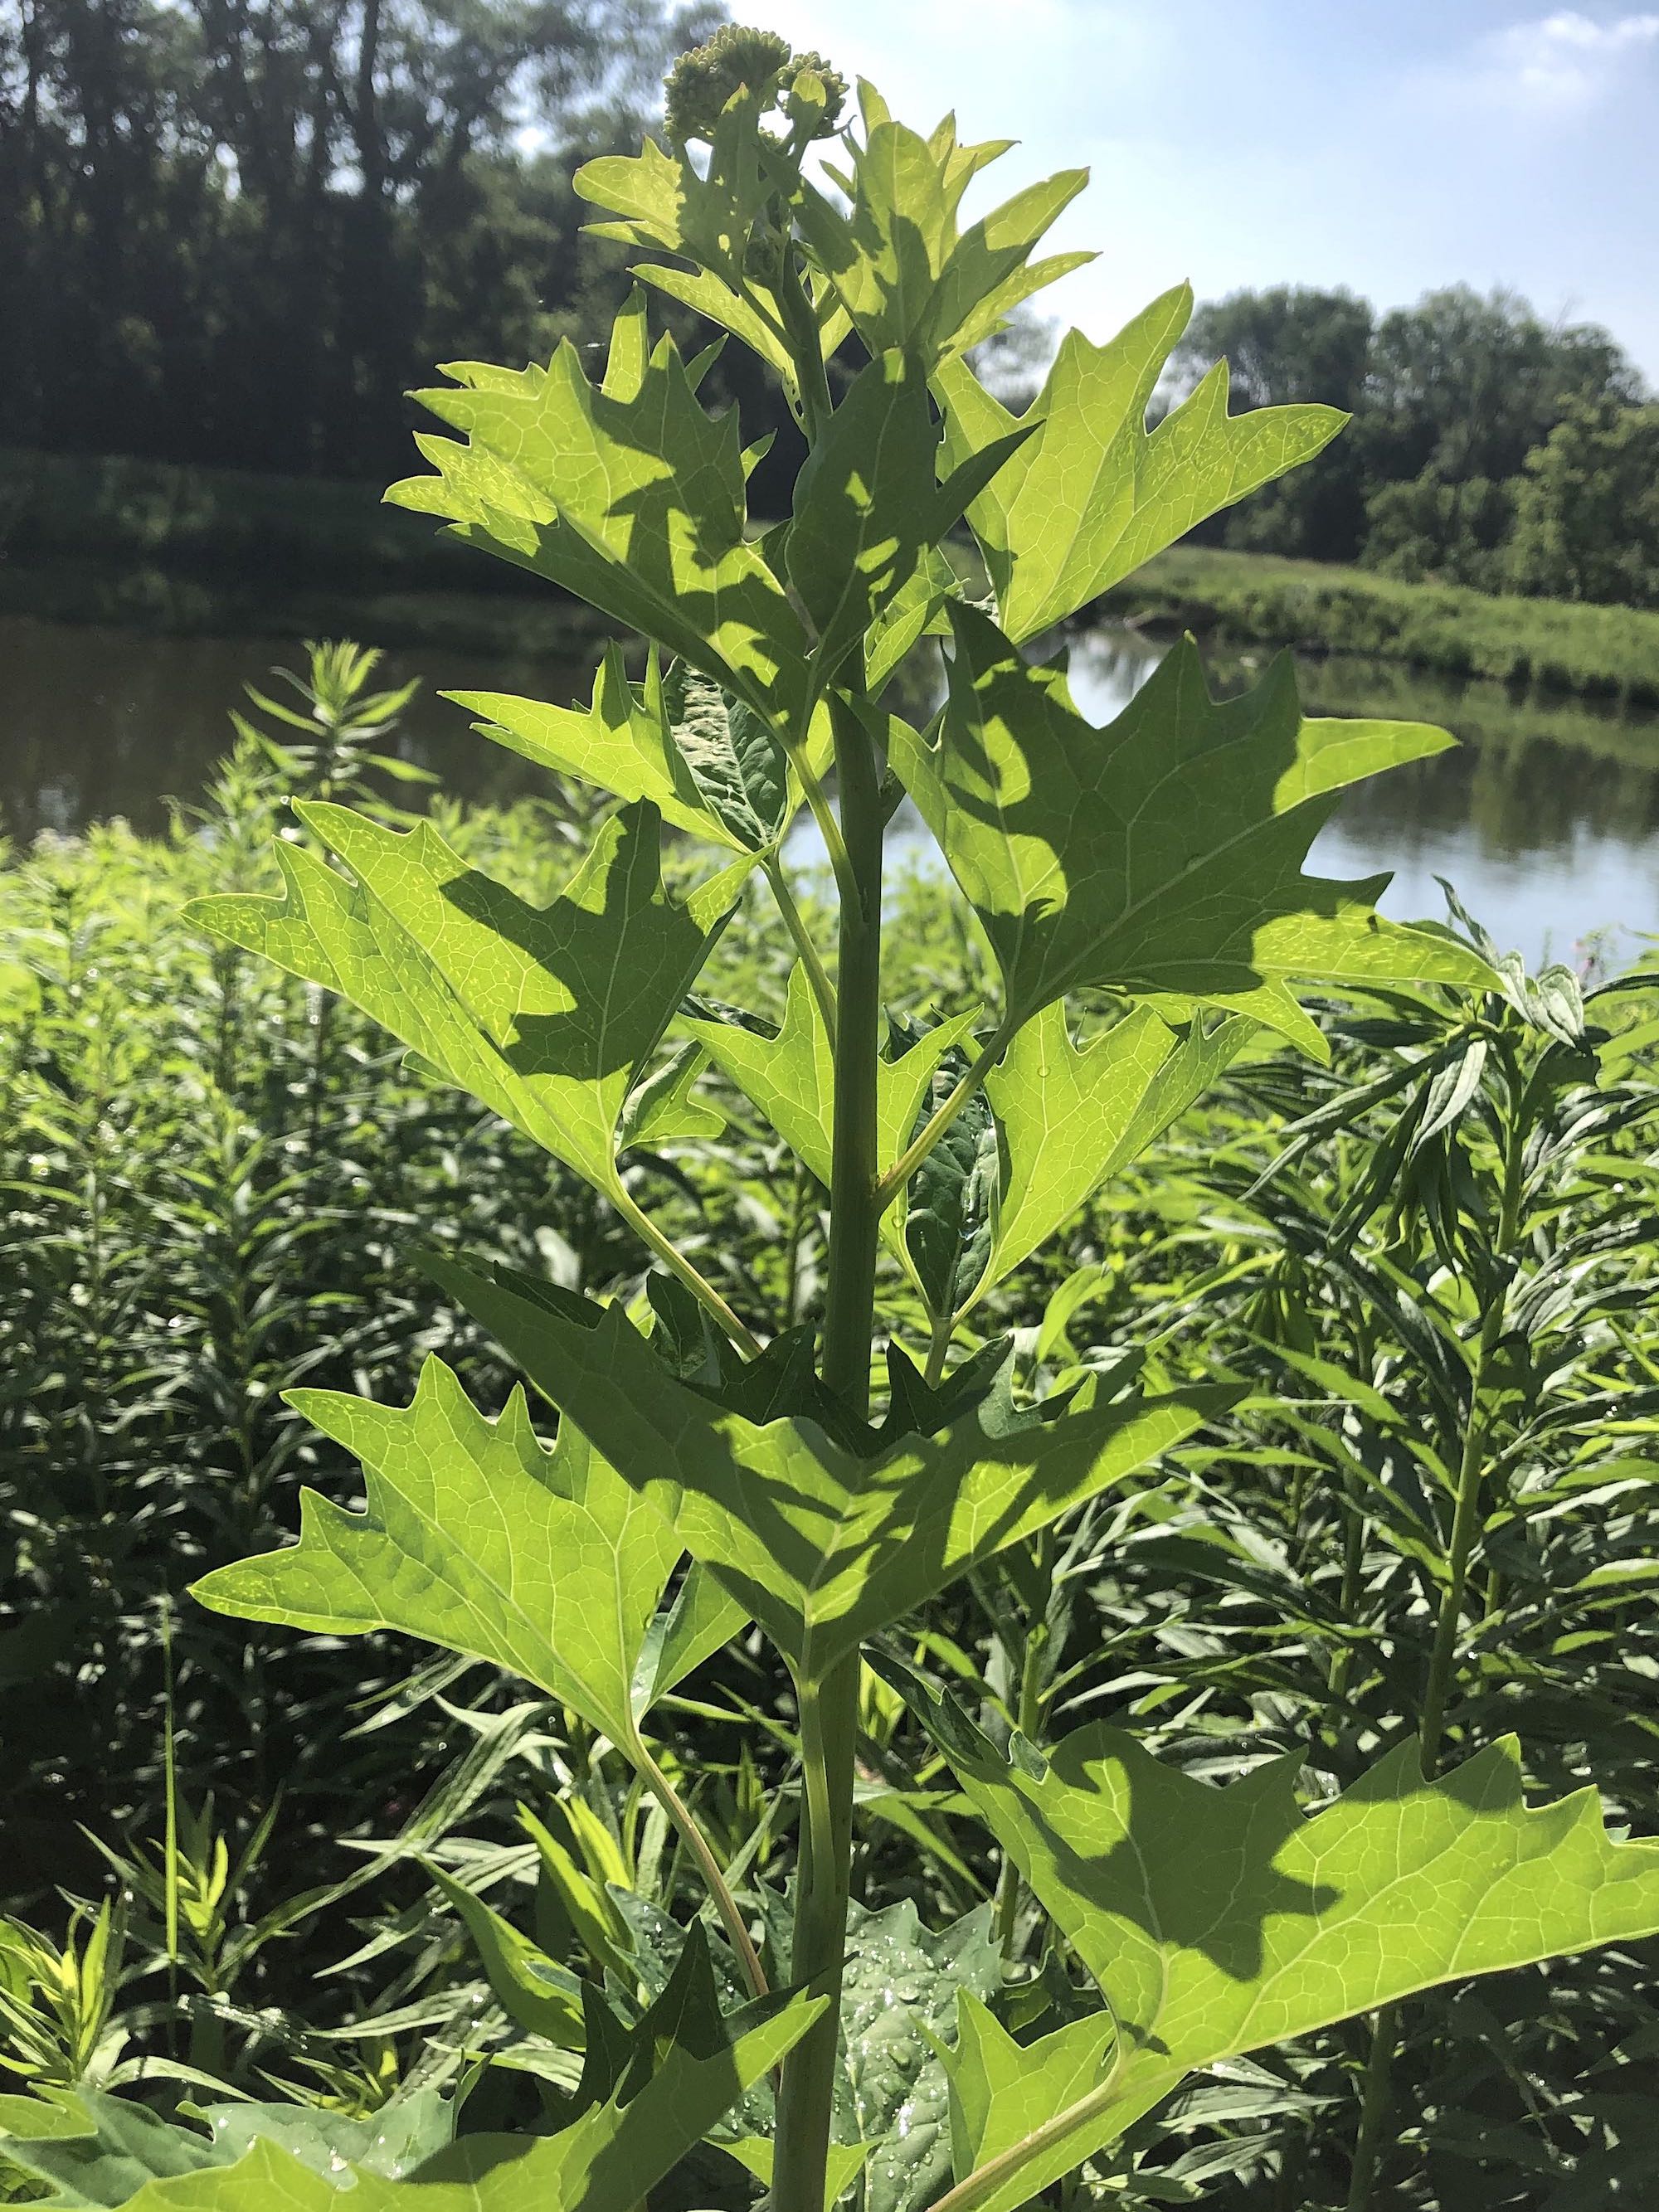 Pale Indian Plantain on bank of retaining pond on corner of Nakoma Road and Manitou Way in Madison, Wisconsin on July 4, 2019.